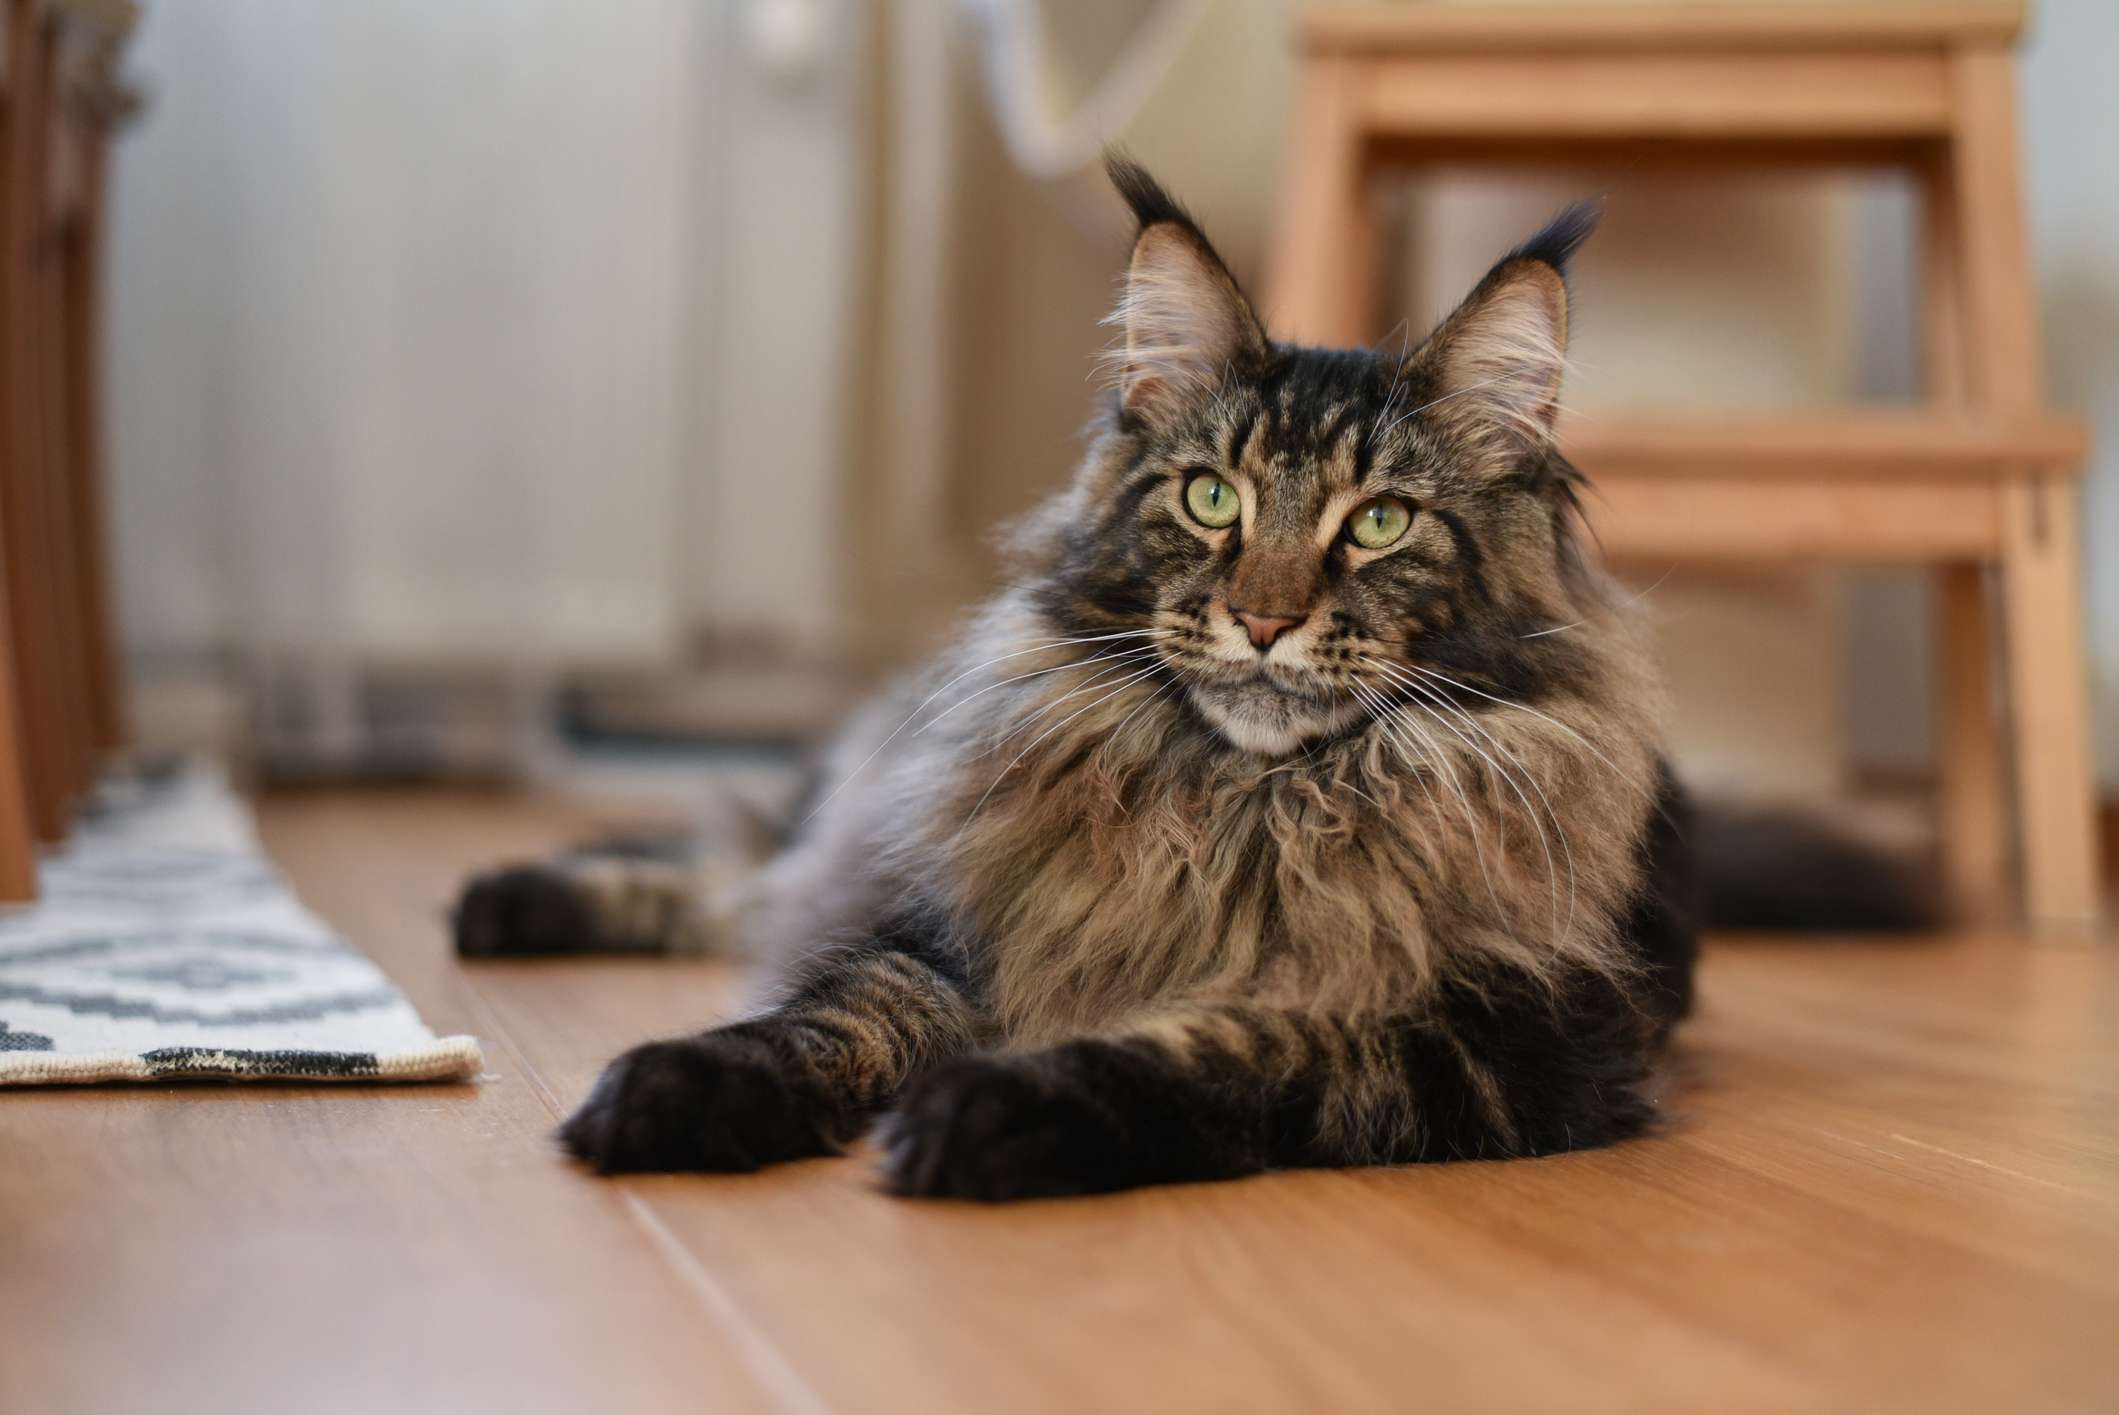 A brown tabby Maine Coon cat with pointed ears laying on wood floor and looking past camera.